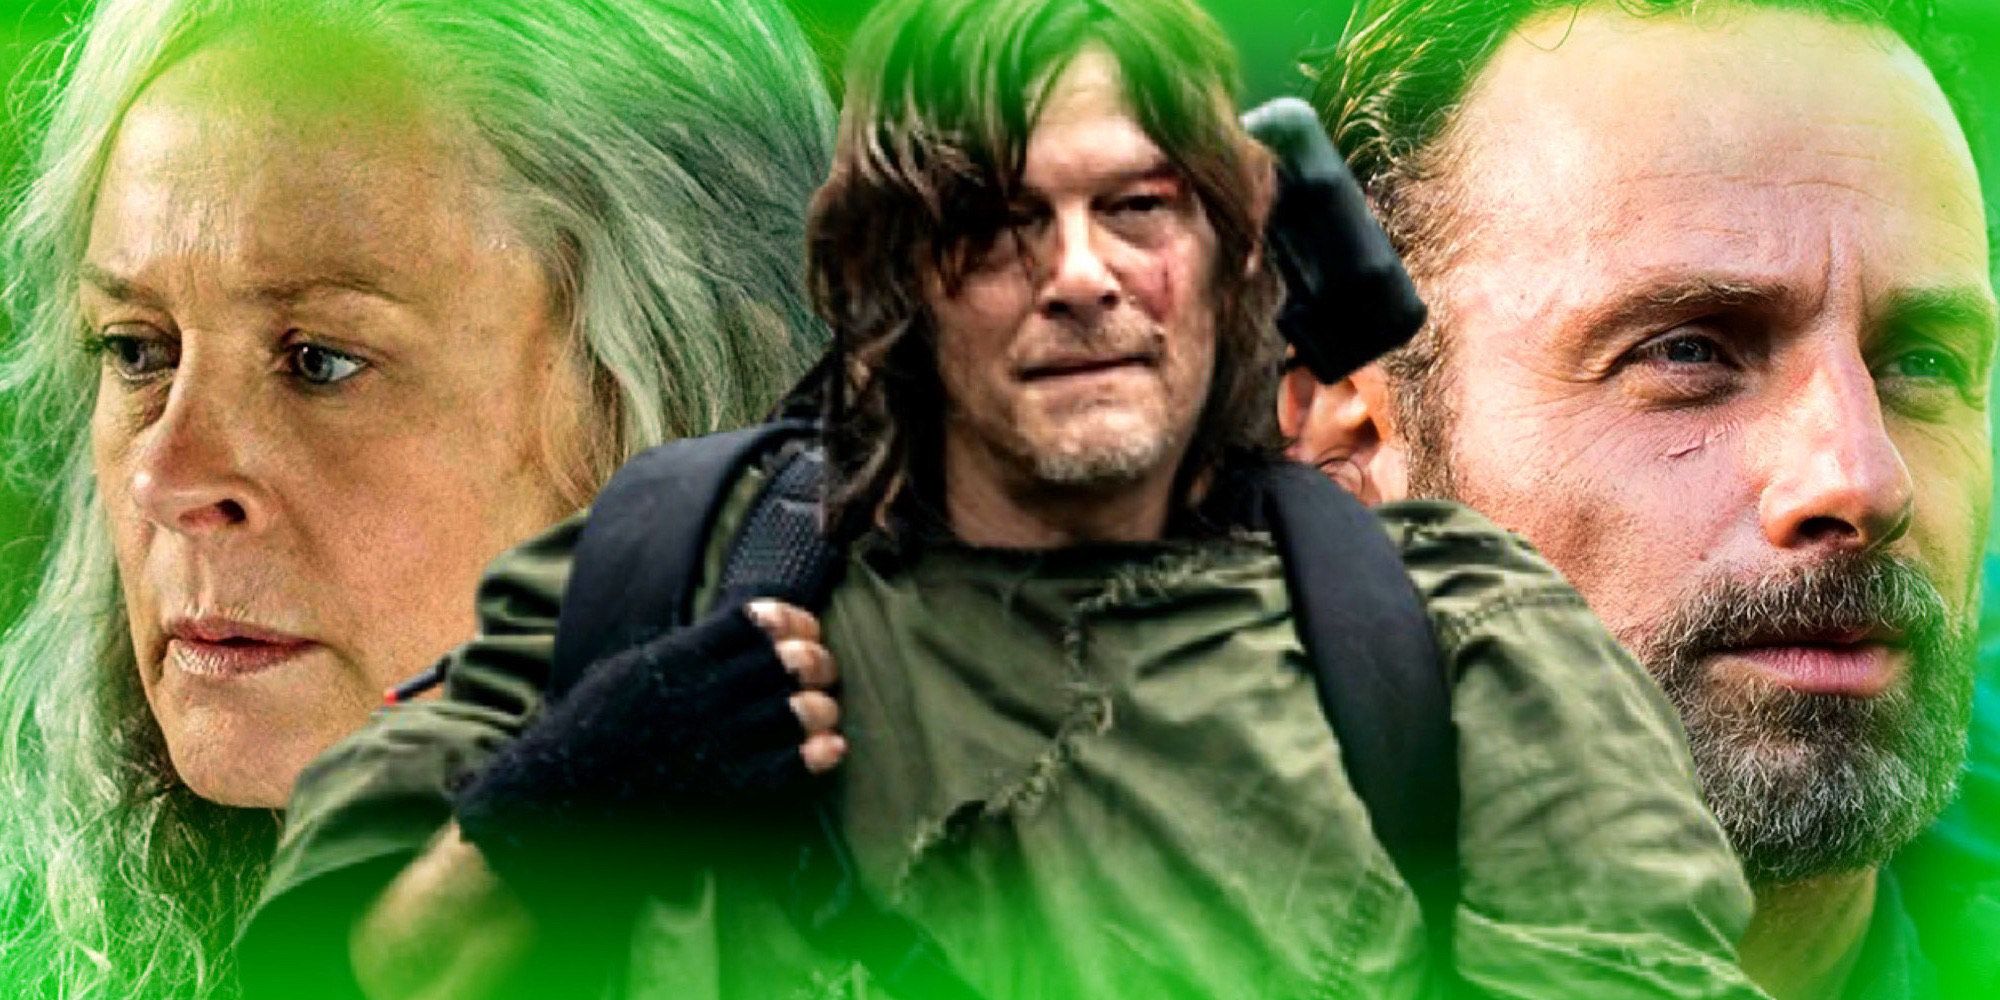 Rick, Daryl, and Carol from The Walking Dead